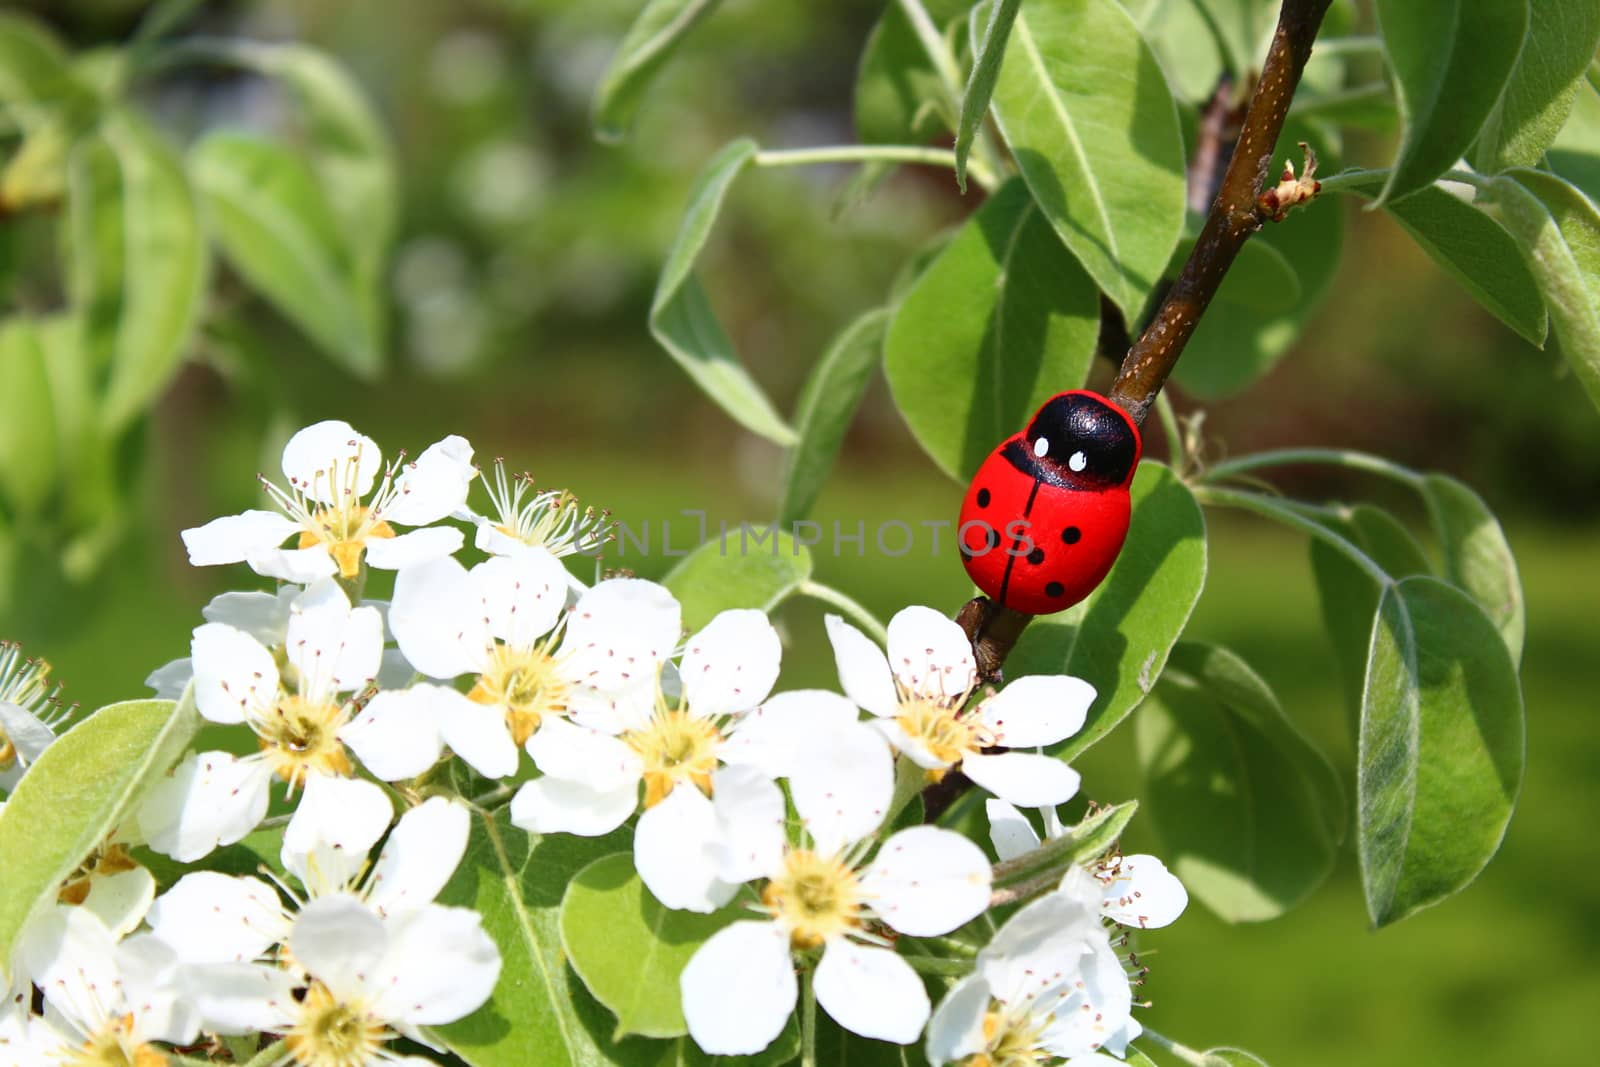 The picture shows a ladybug in a blooming pear tree.